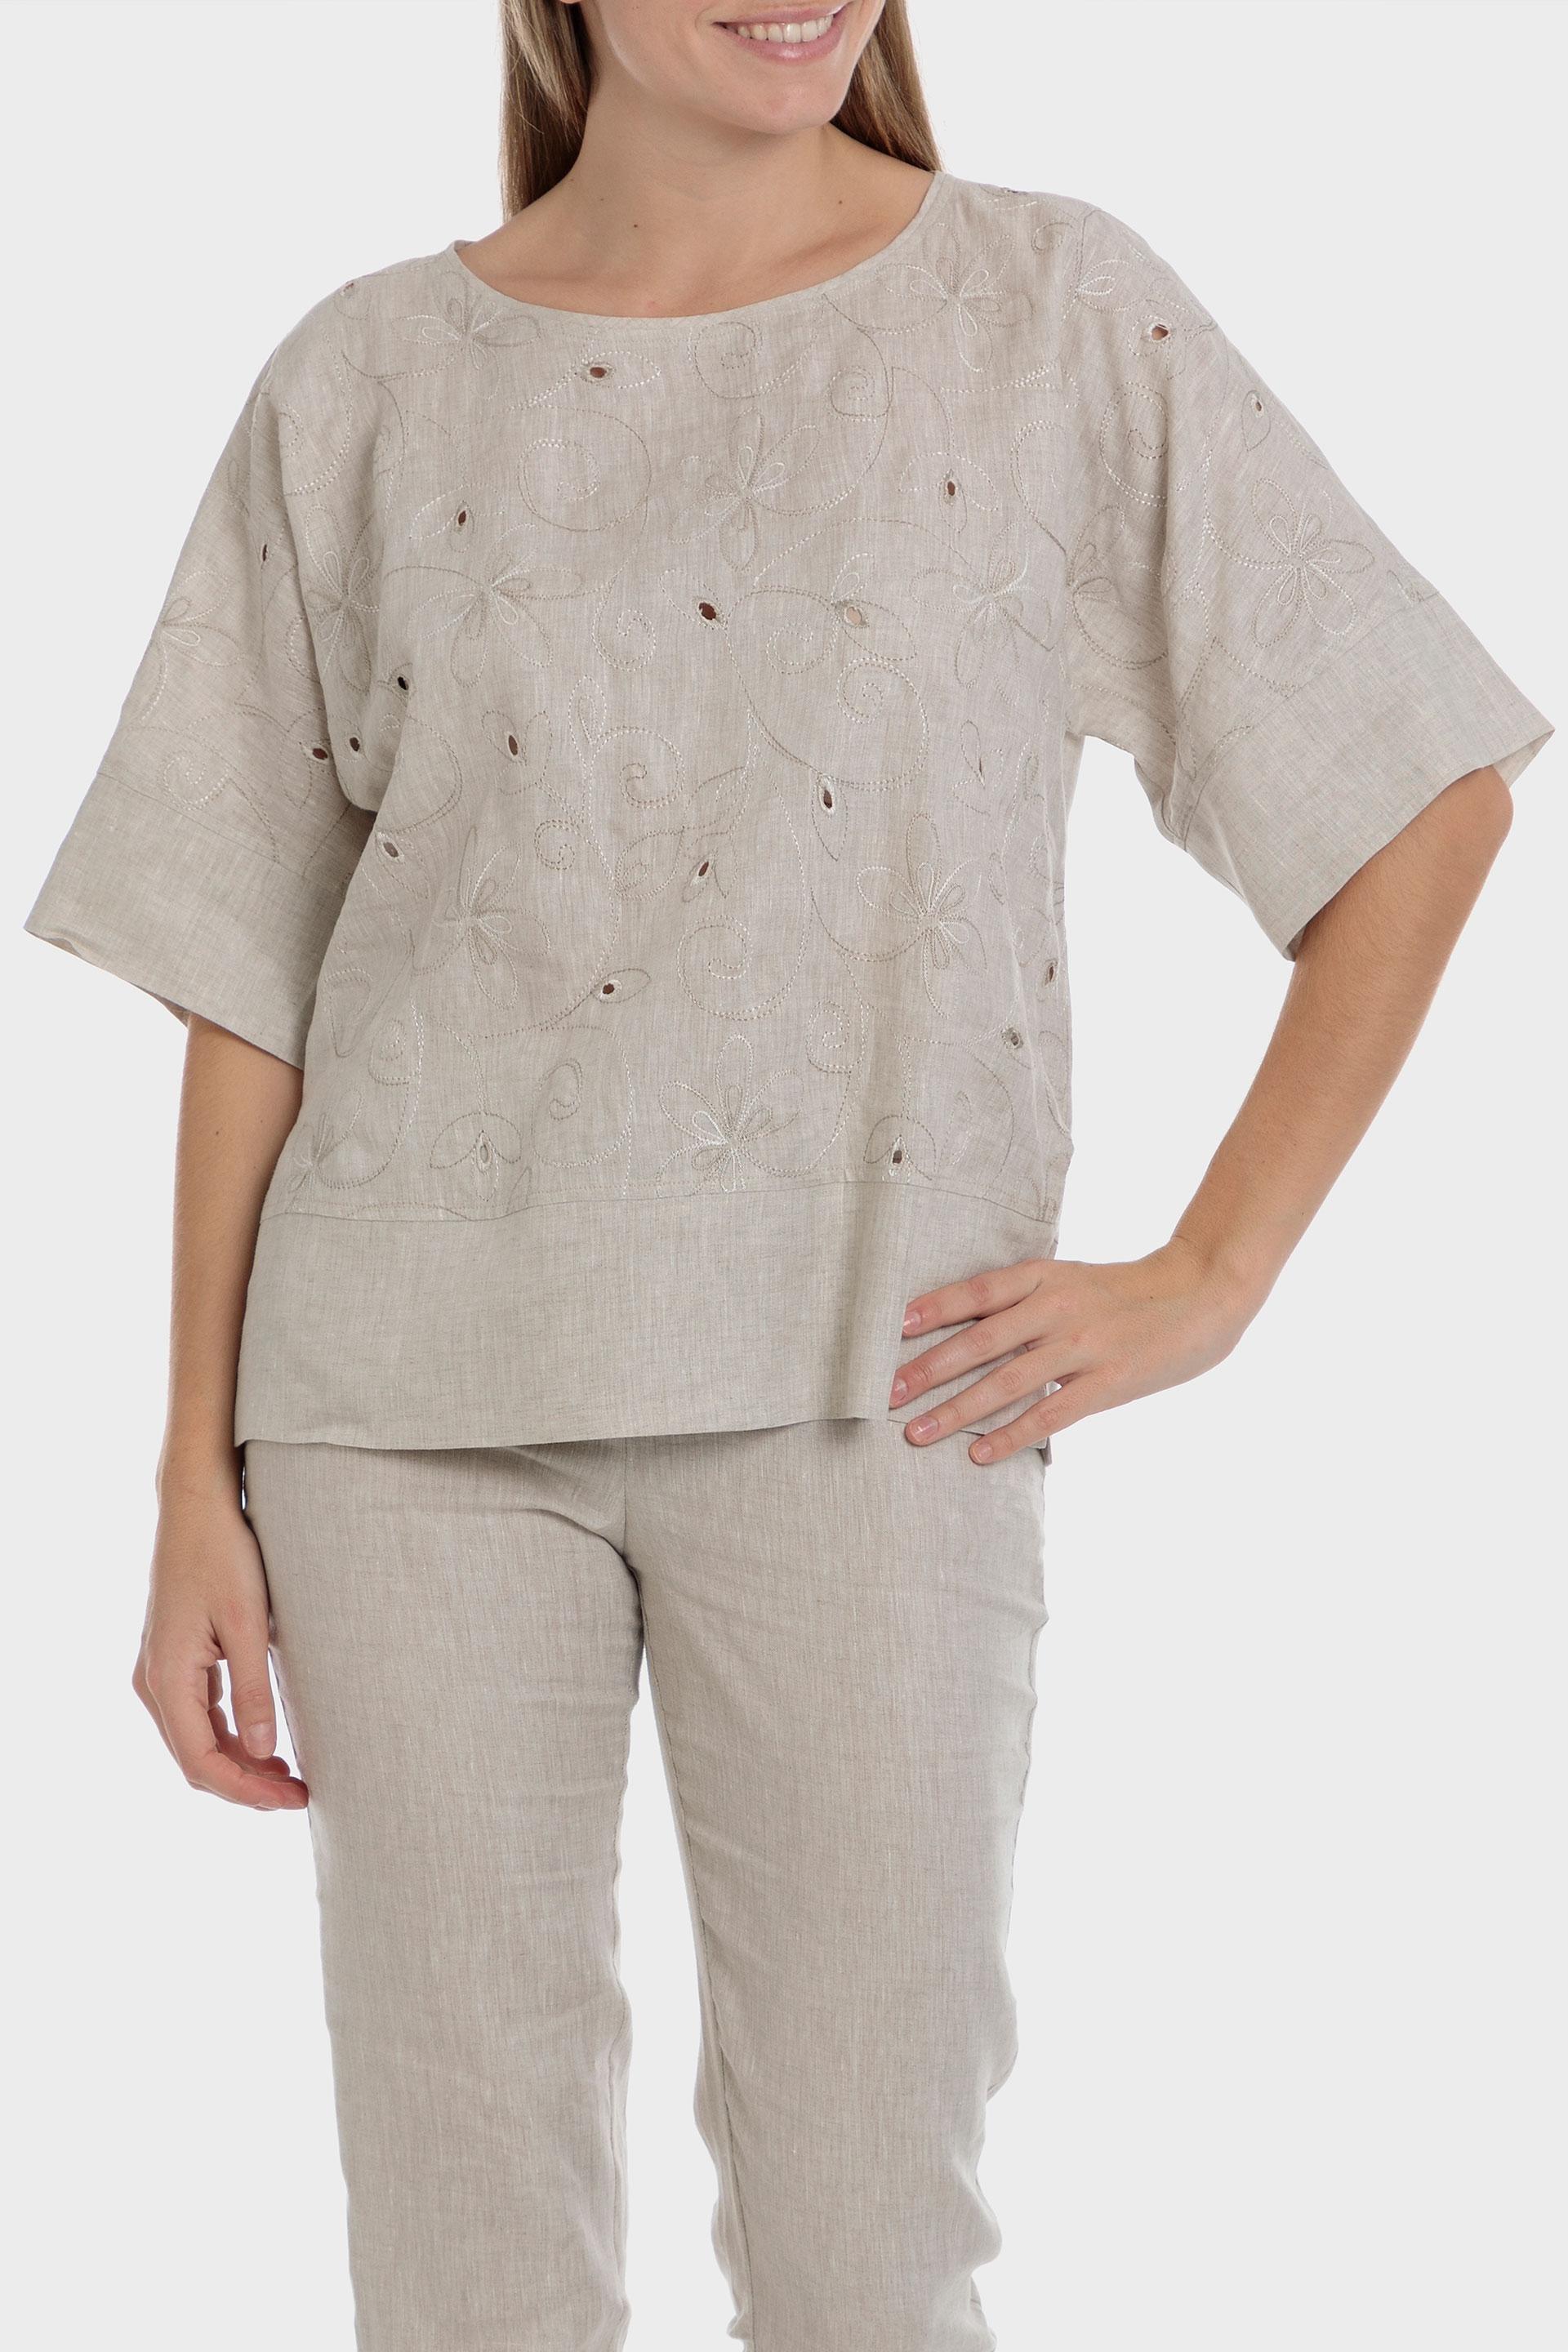 Punt Roma - Beige Round Neck Embroidered Blouse